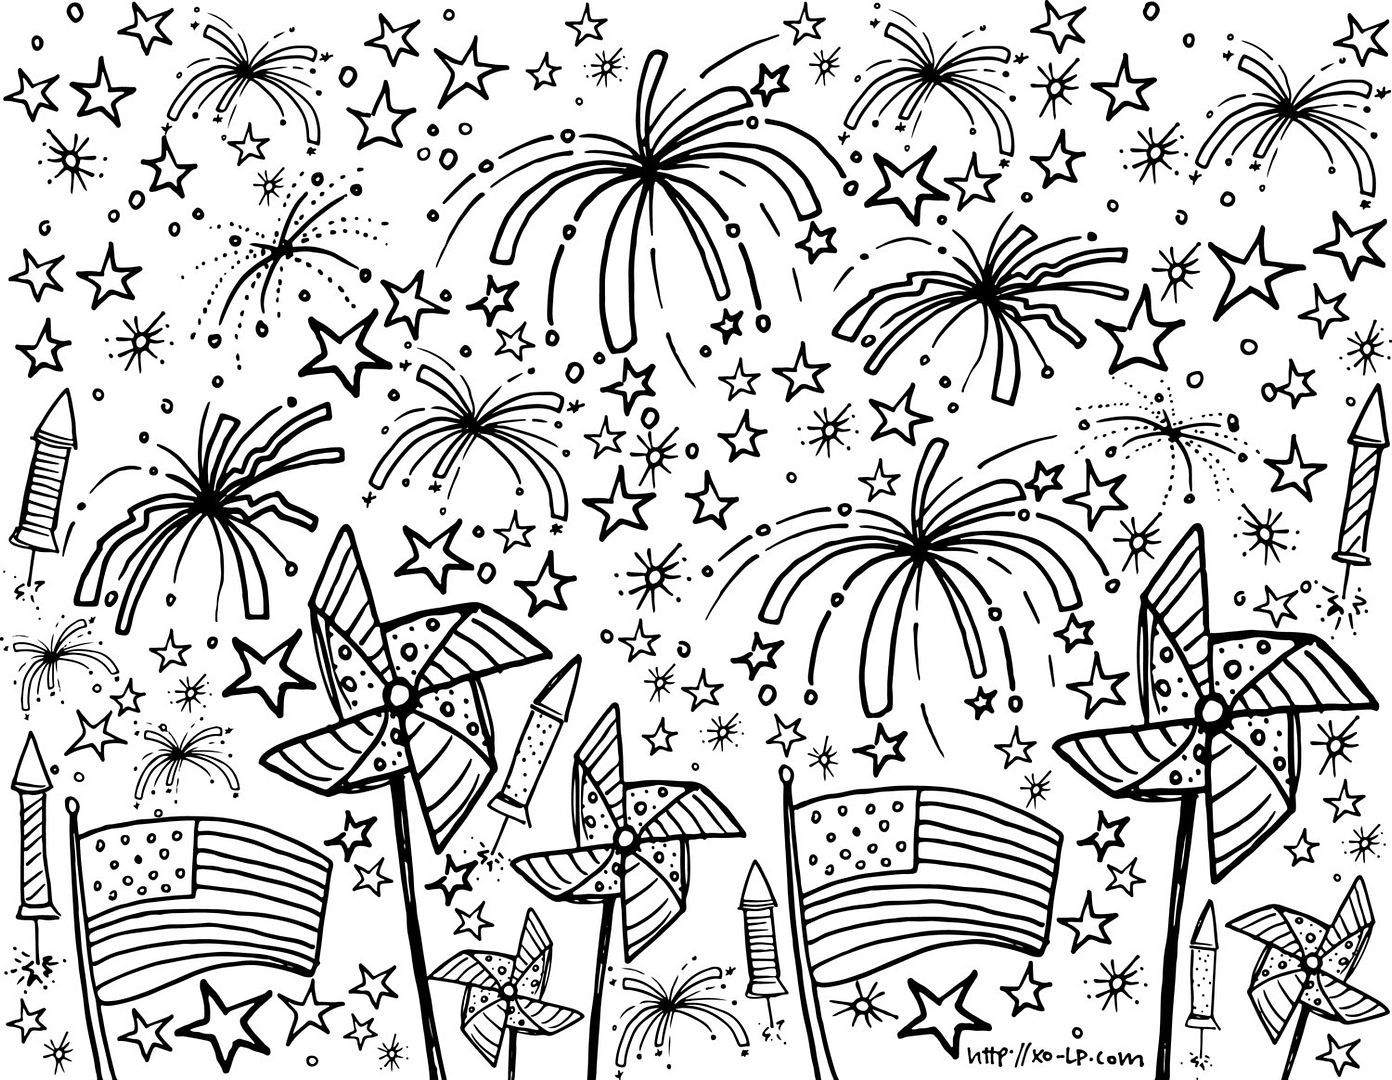 Printable 4th of July coloring pages and other summer themes from xolp on Etsy